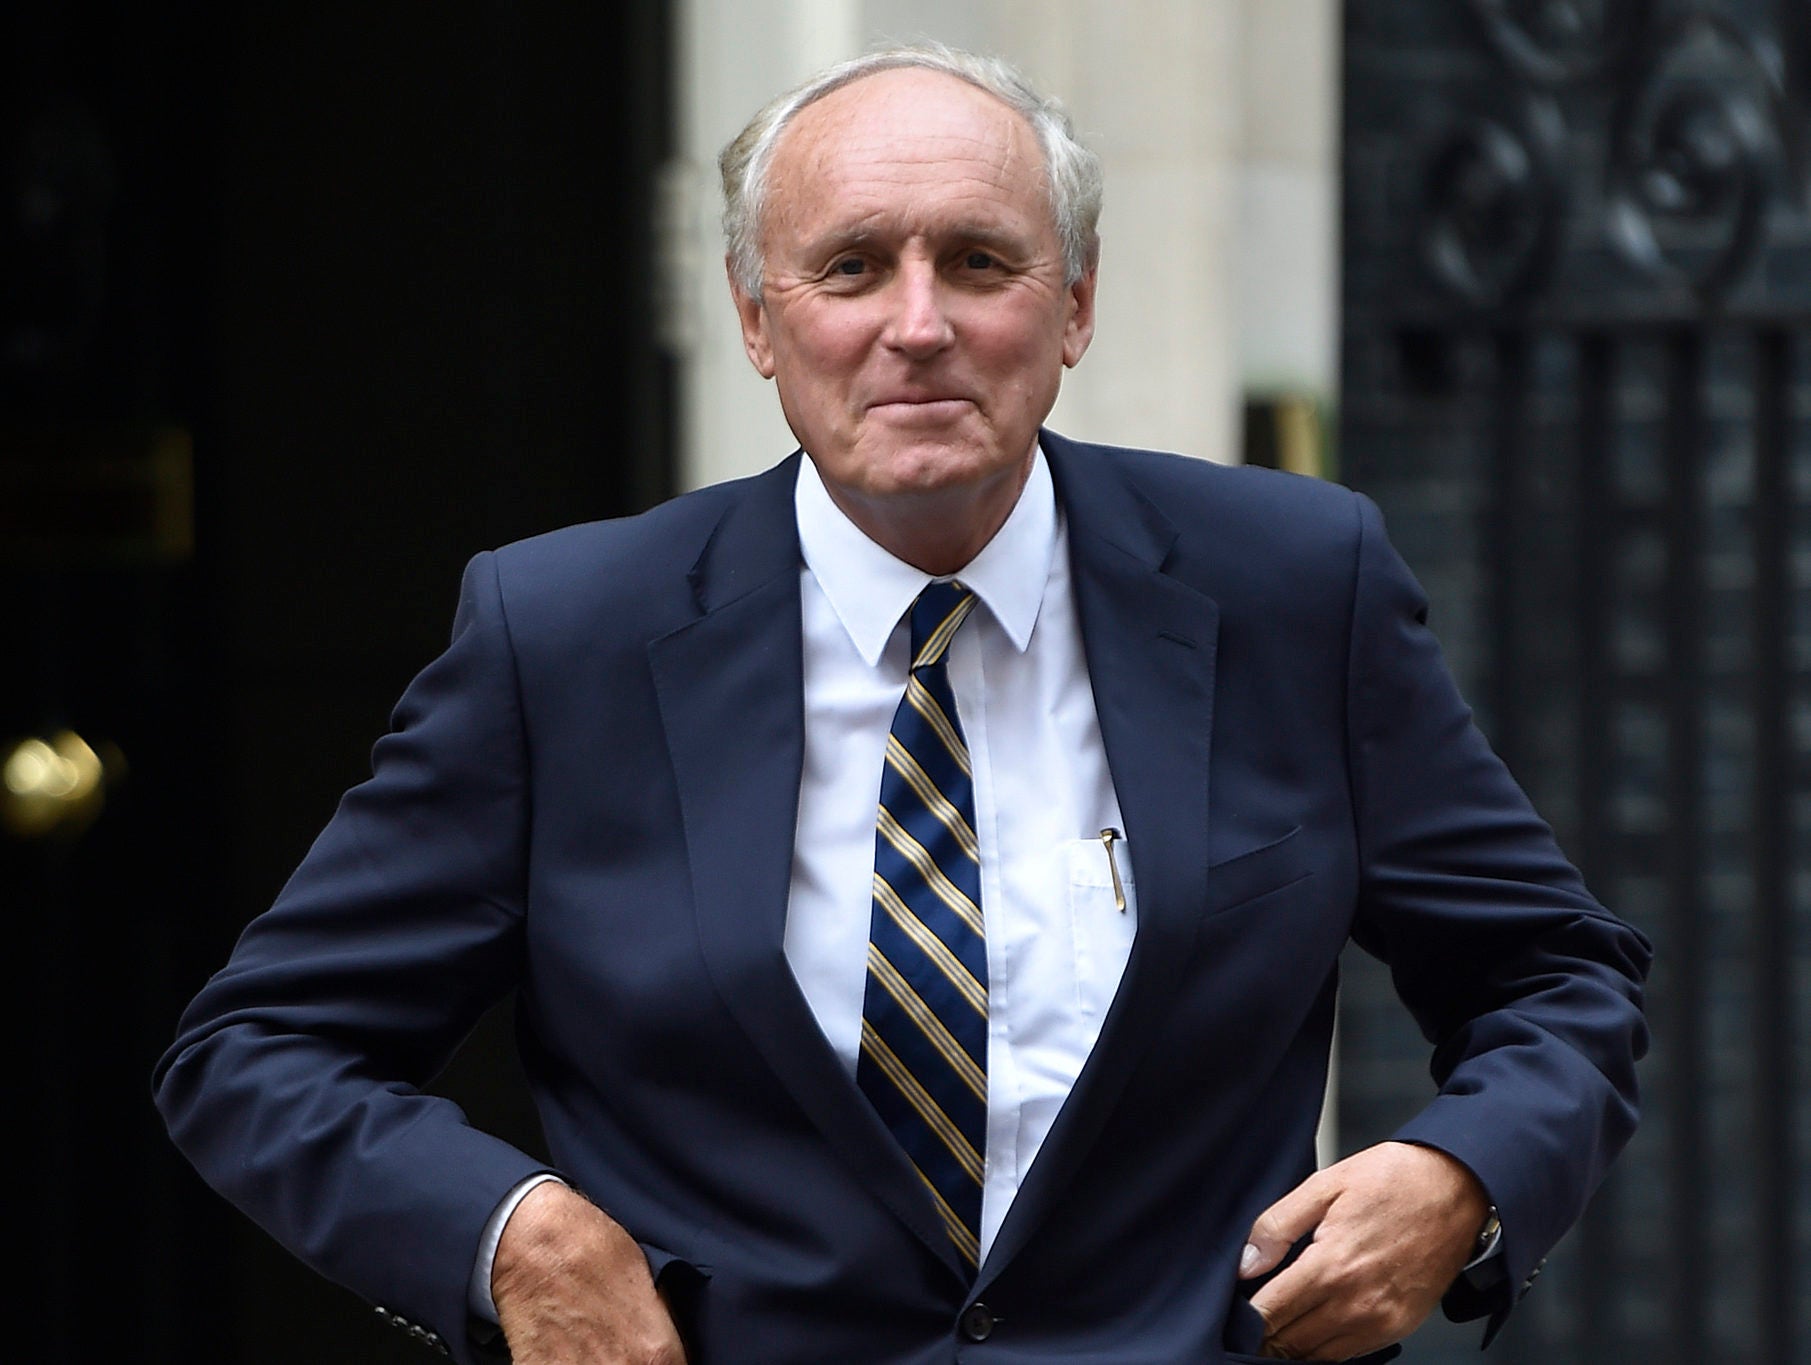 12 of the biggest media stories of 2018, from Paul Dacre’s departure as Daily Mail editor to Johnston Press sale